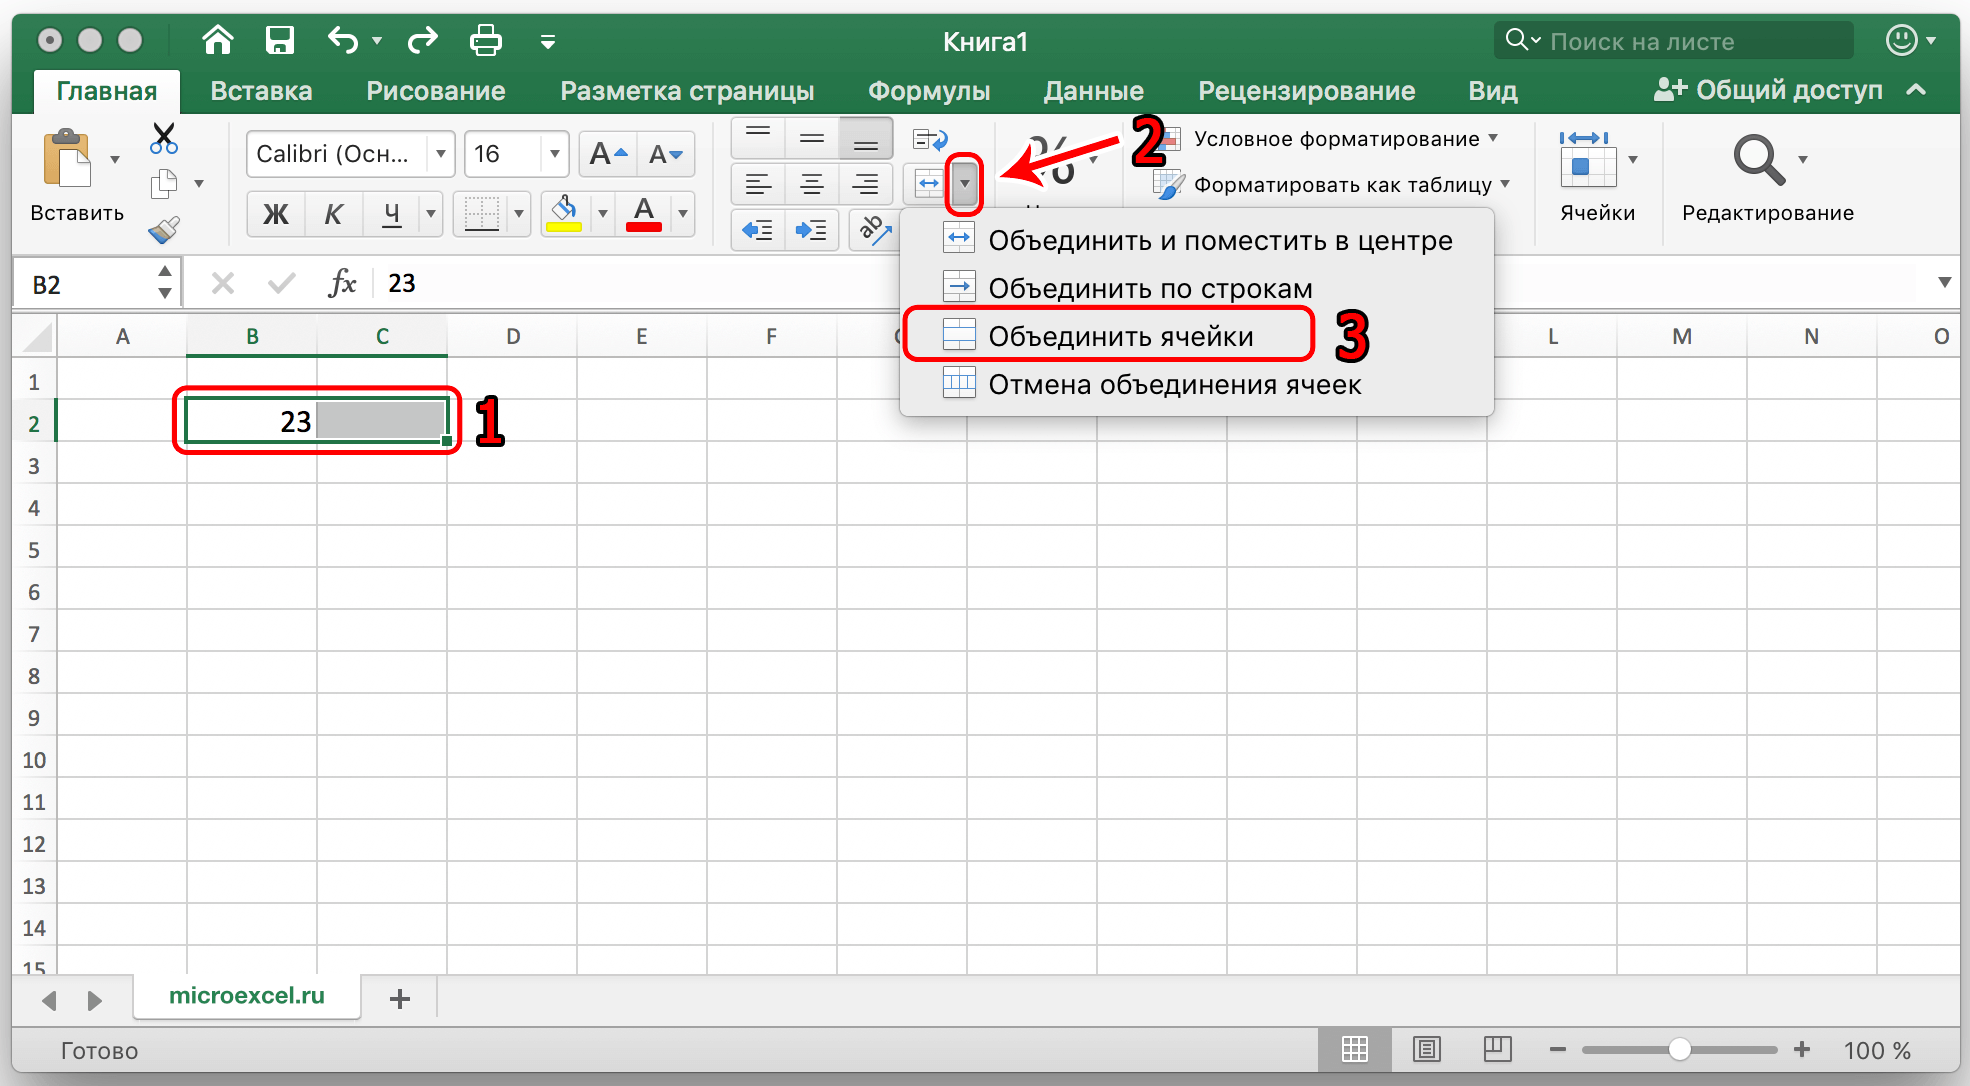 How to merge cells in an excel table